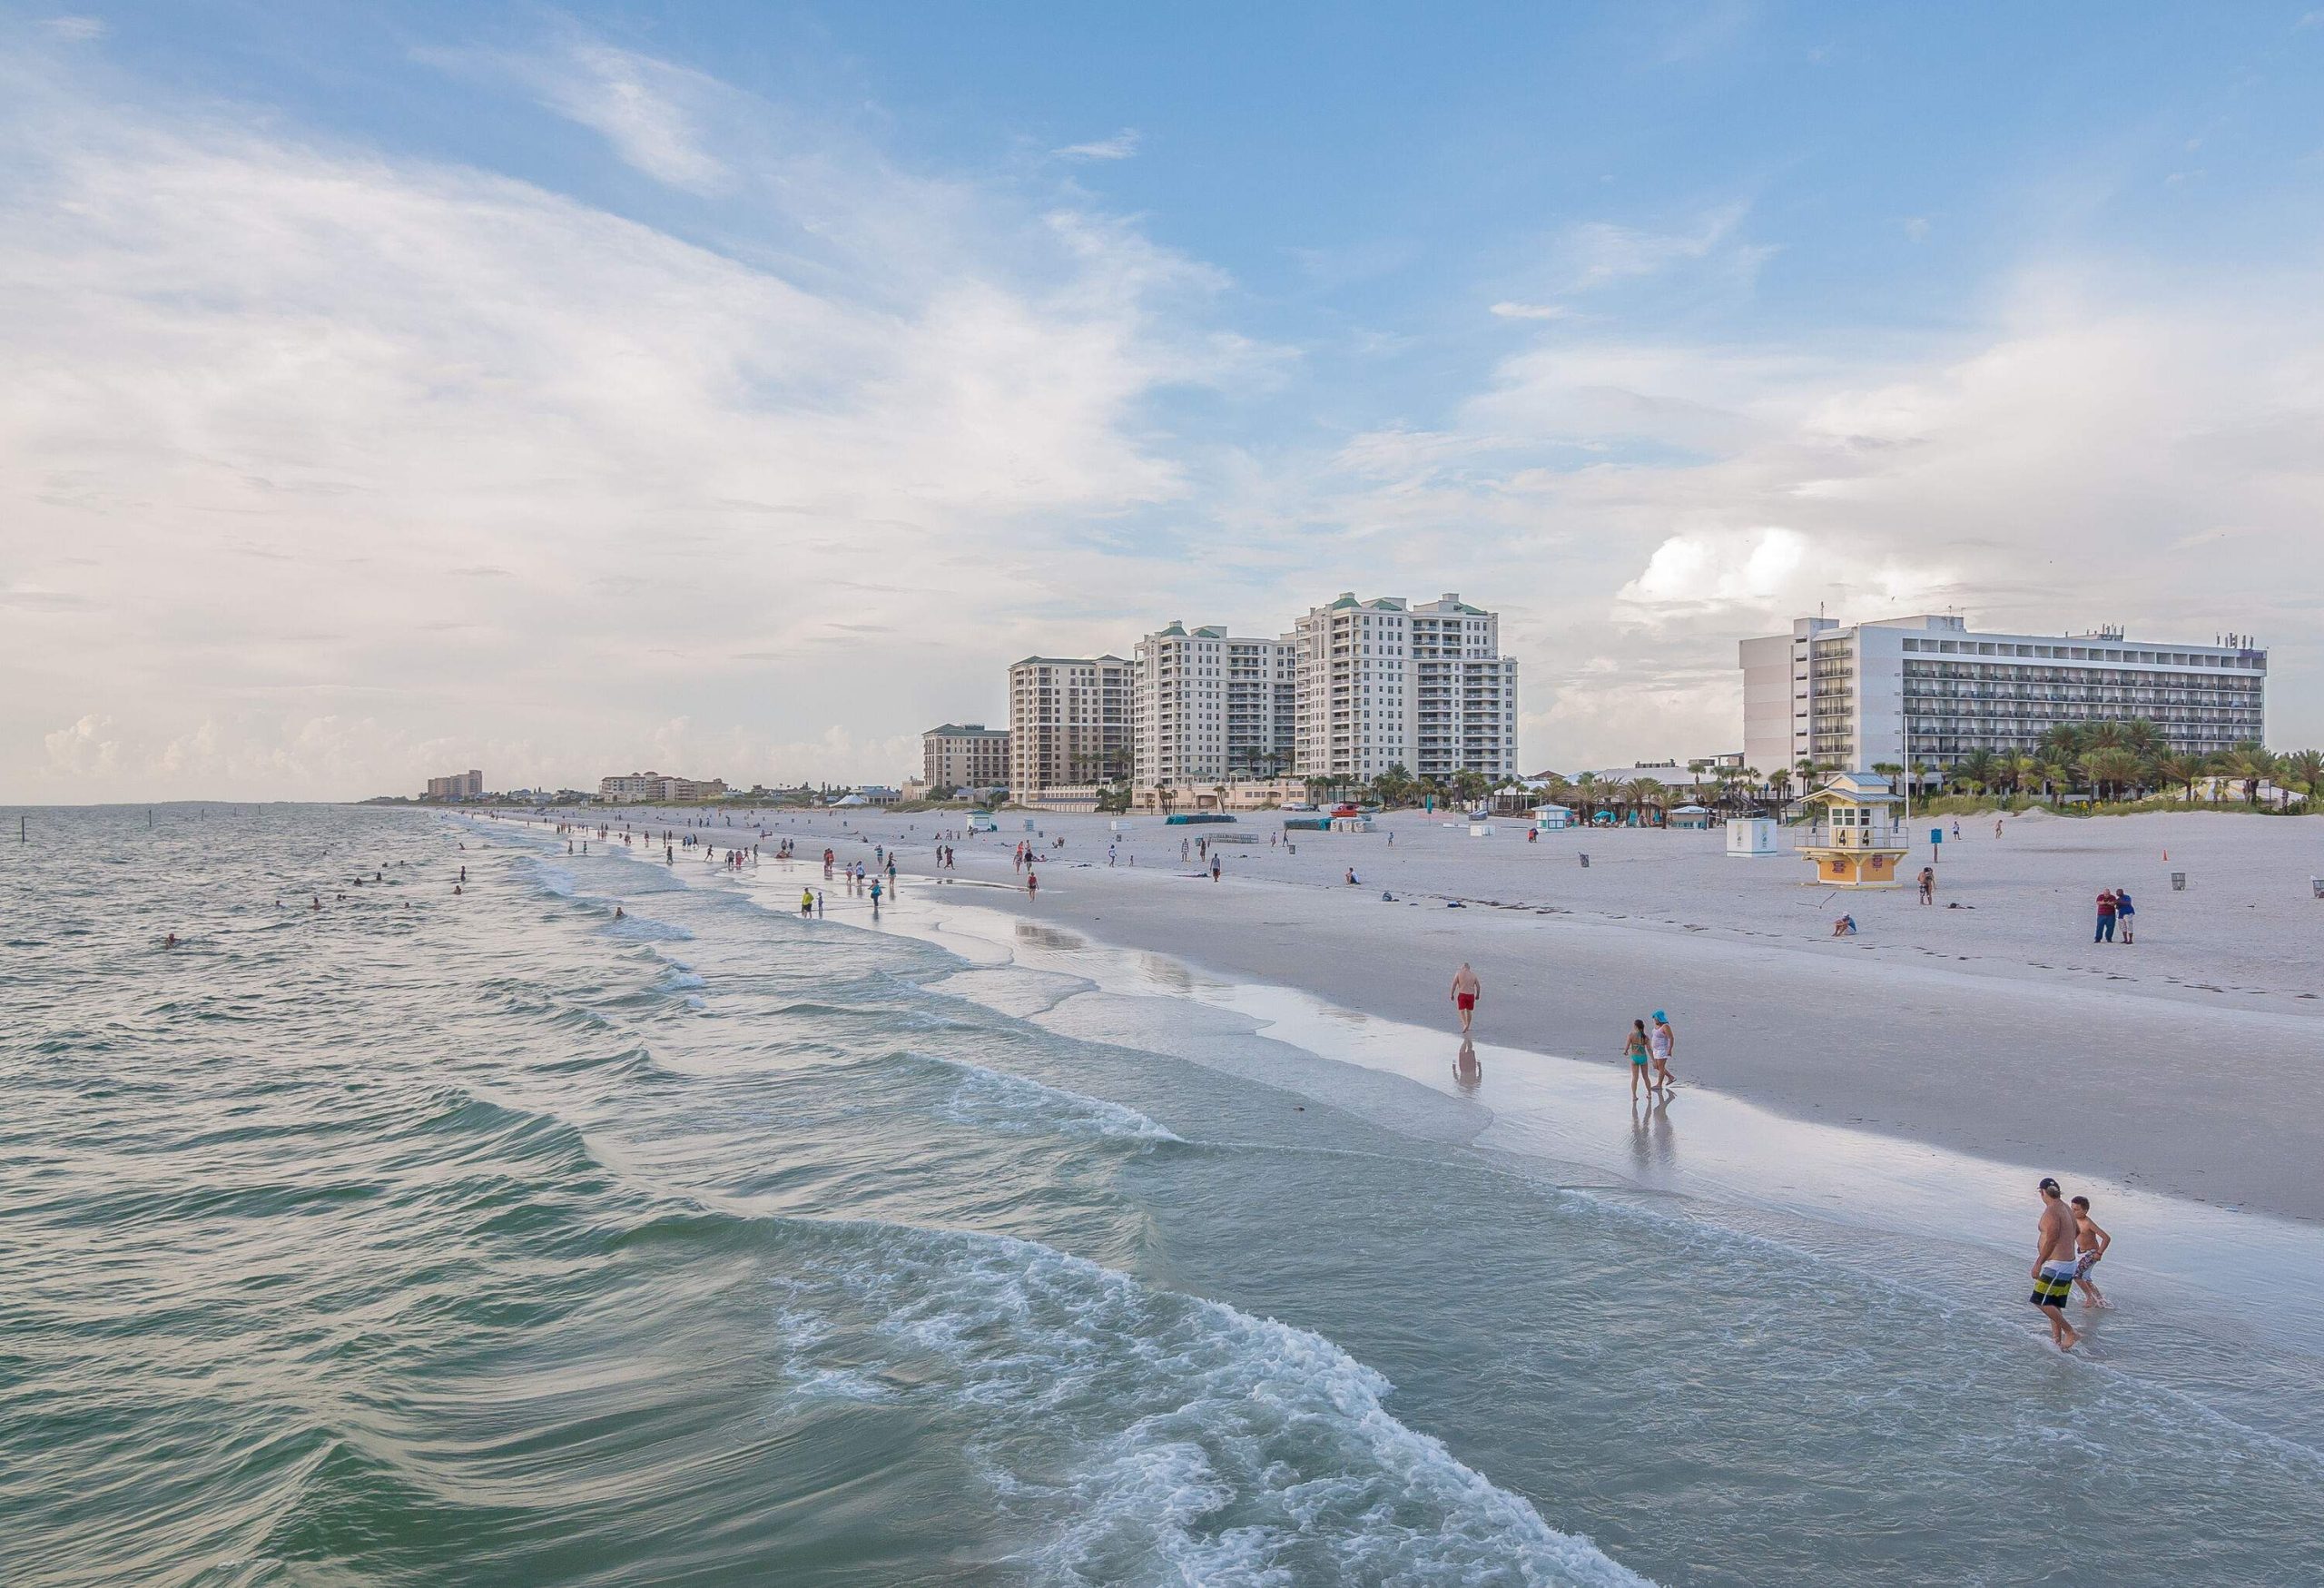 A beach with rhythmic waves, beachgoers leisurely walking by the water's edge, and distant buildings adding urban allure to the scenic panorama.